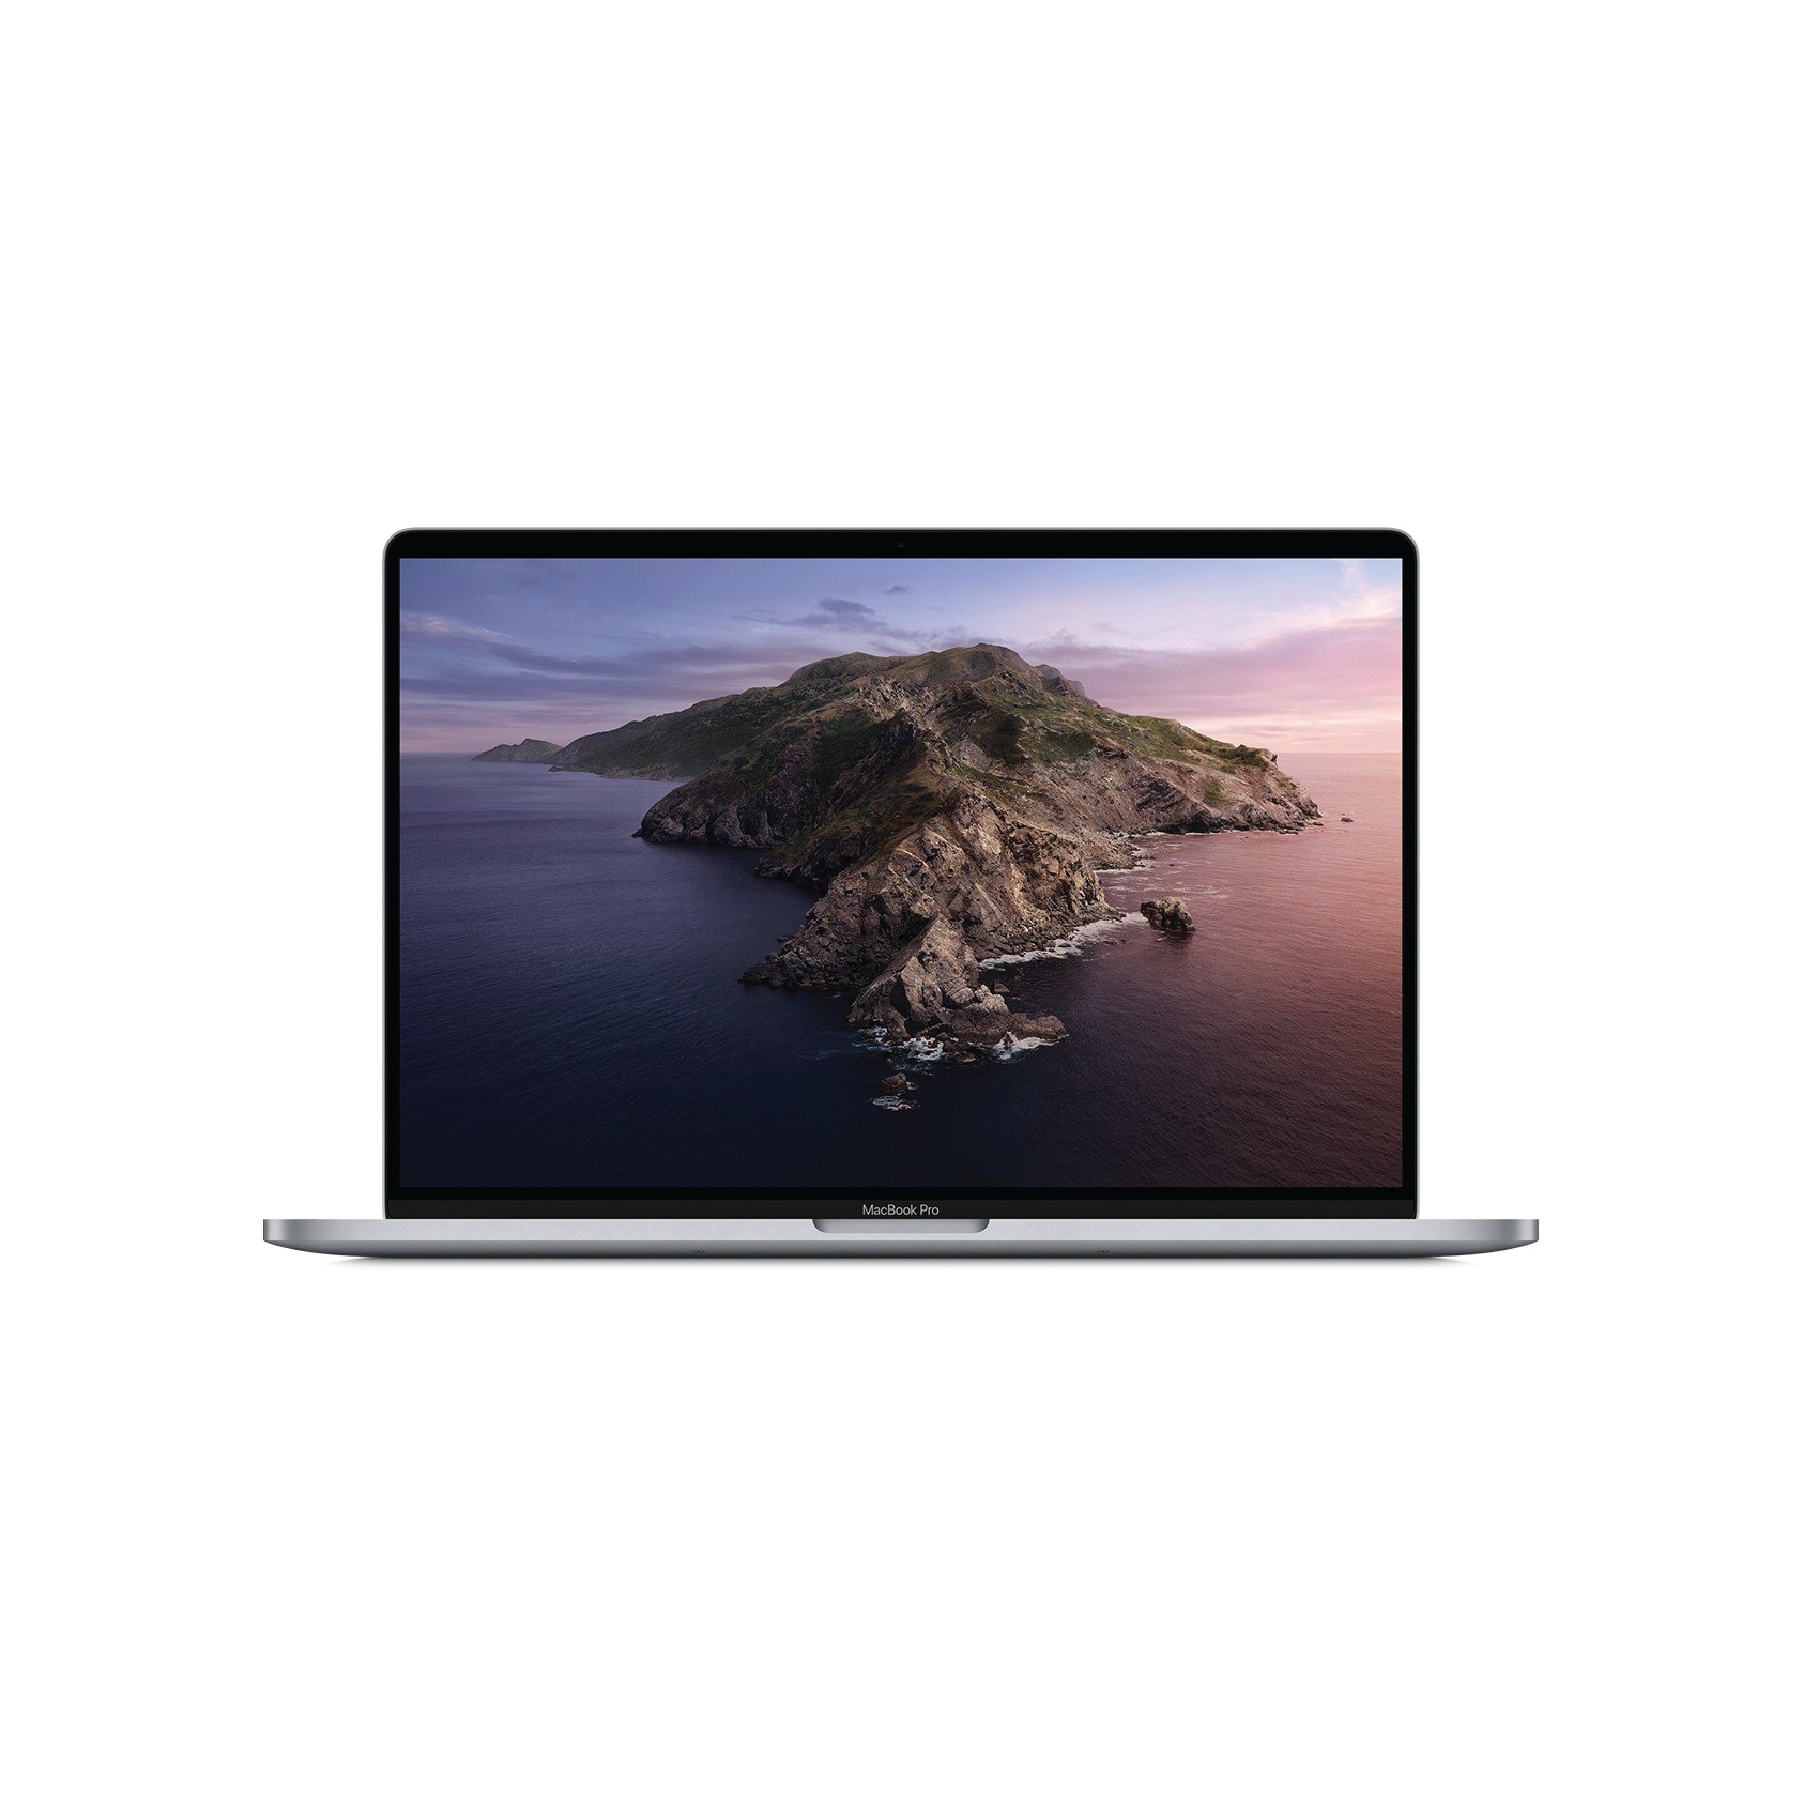 MacBook Pro (16-inch, 2019) 2.6GHz, Intel Core i7 512GB - Space Grey (Good) - iStore Pre-owned